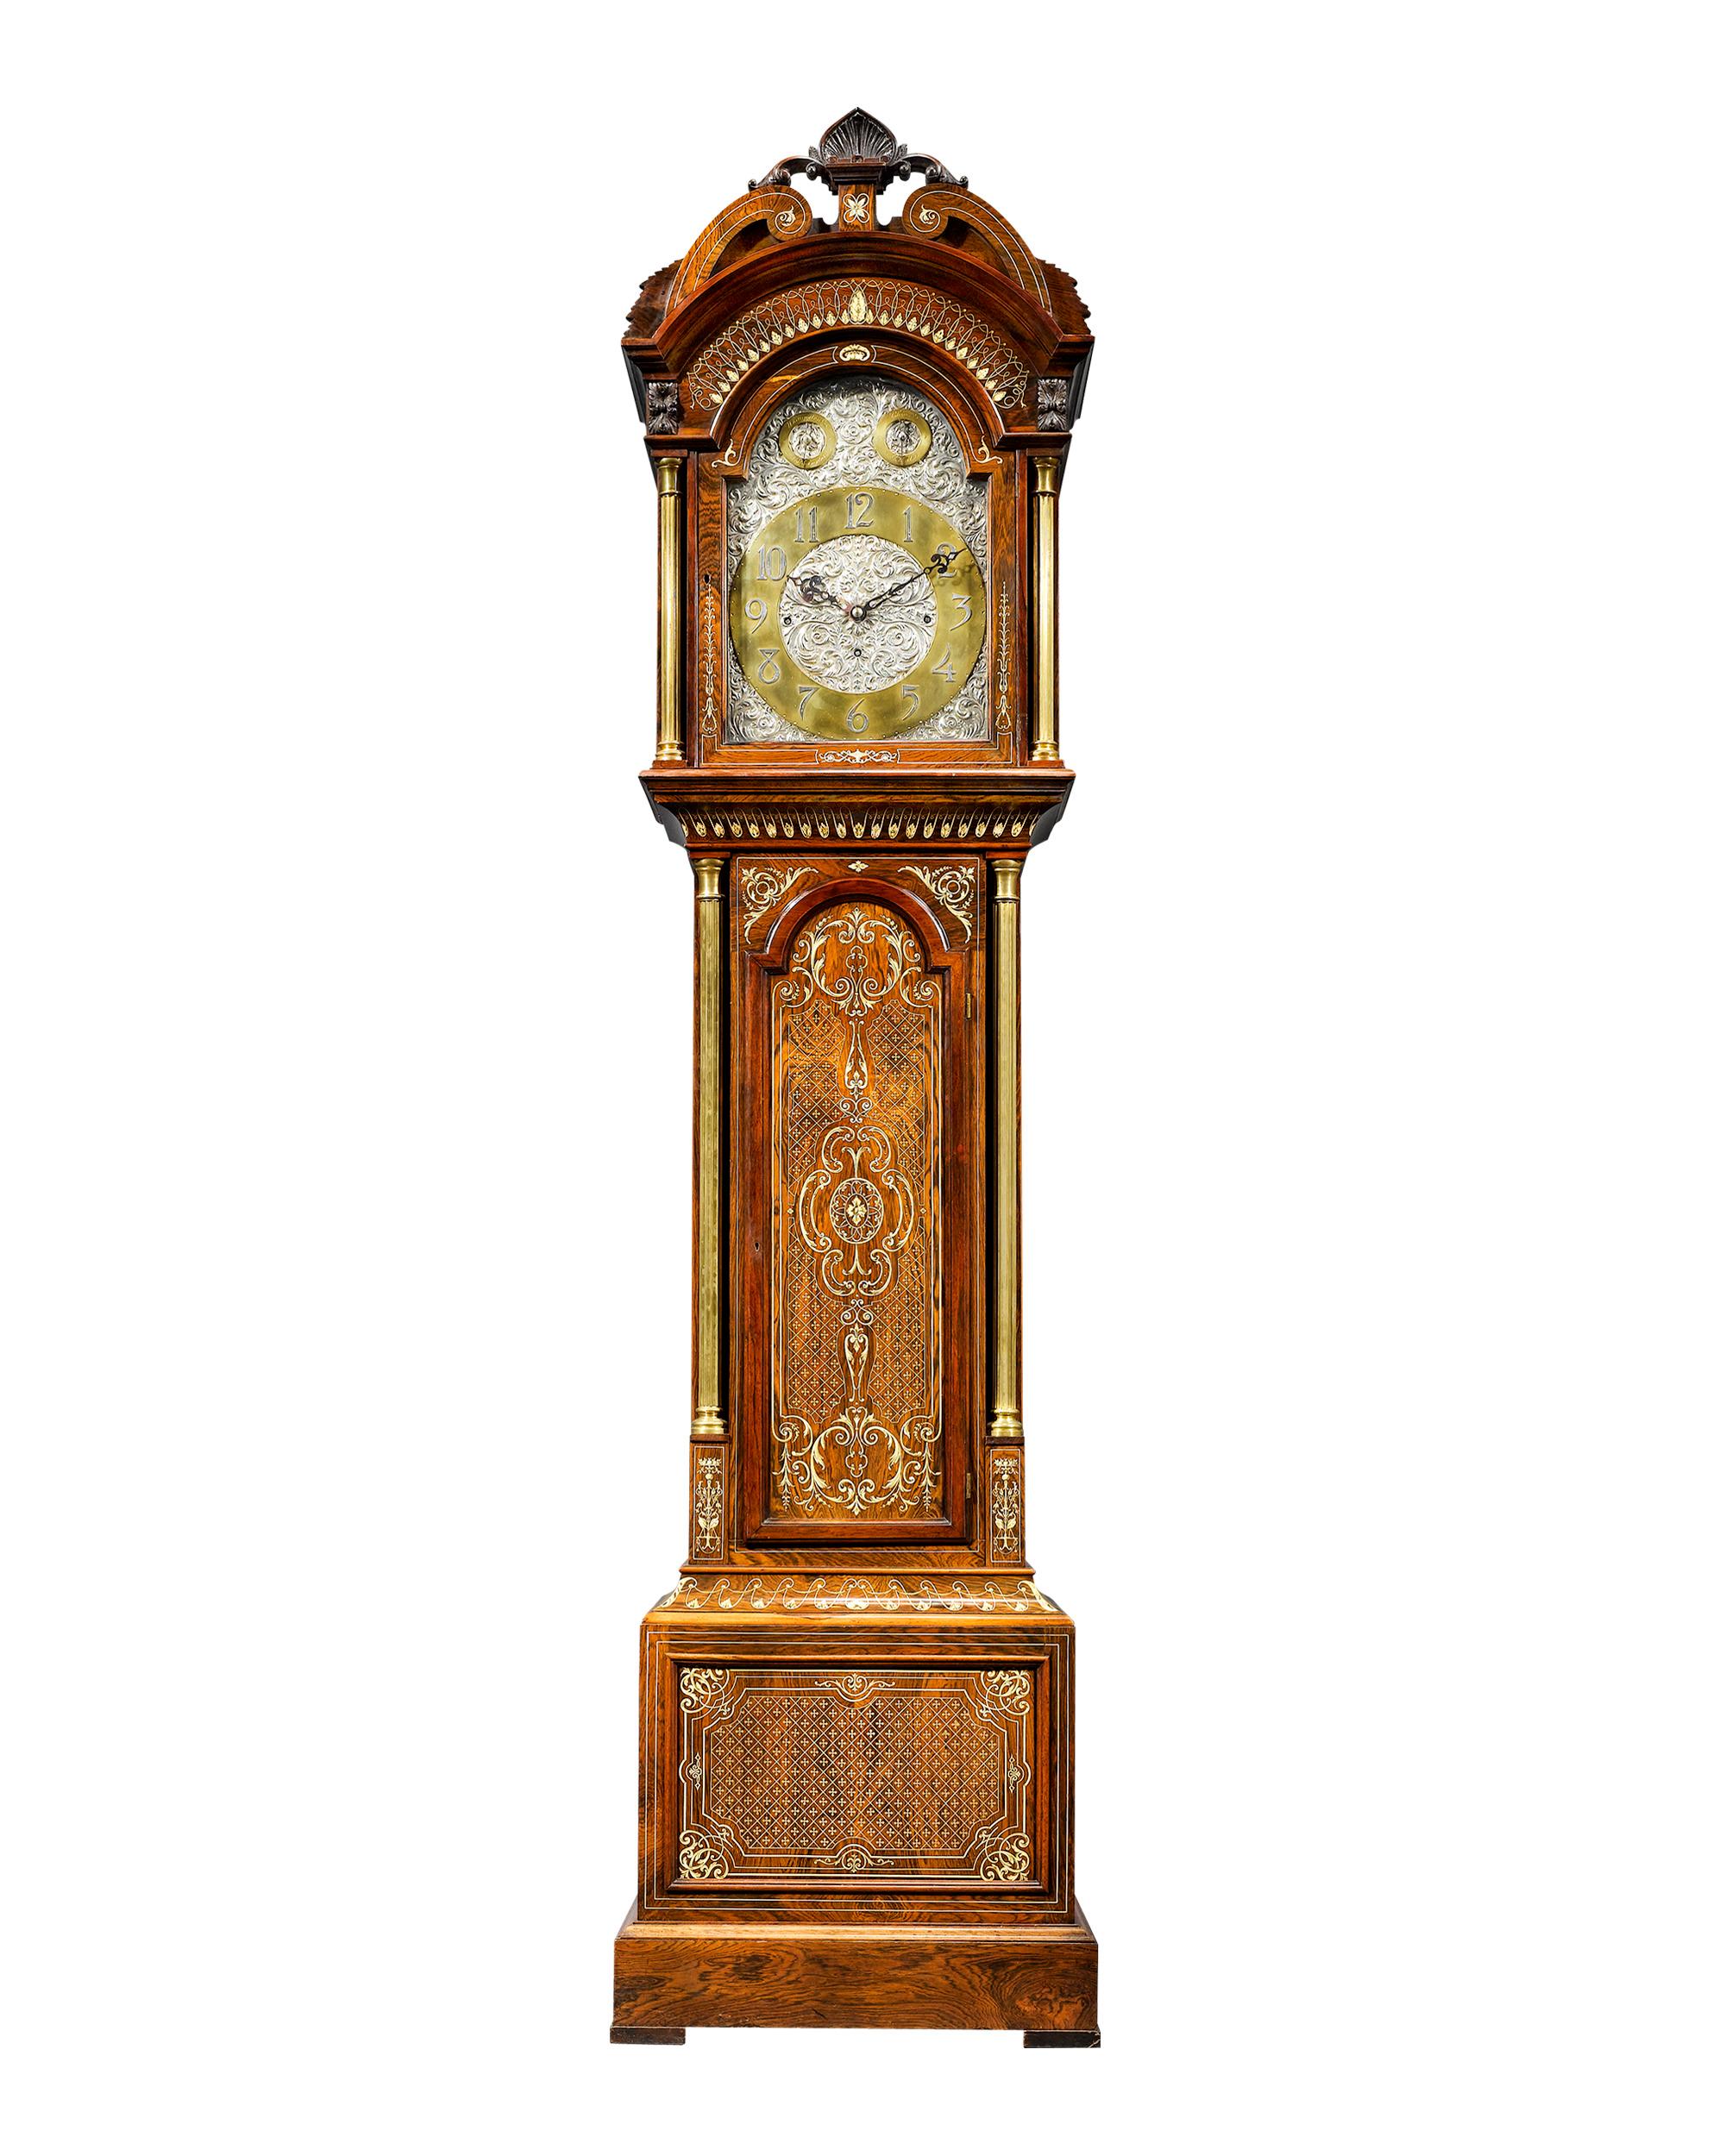 This magnificent English longcase, or grandfather, clock boasts a fine rosewood case inlaid with an intricate, balanced design. The face is crafted of chased silver in a foliate motif with fully hallmarked numerals by London silversmith James